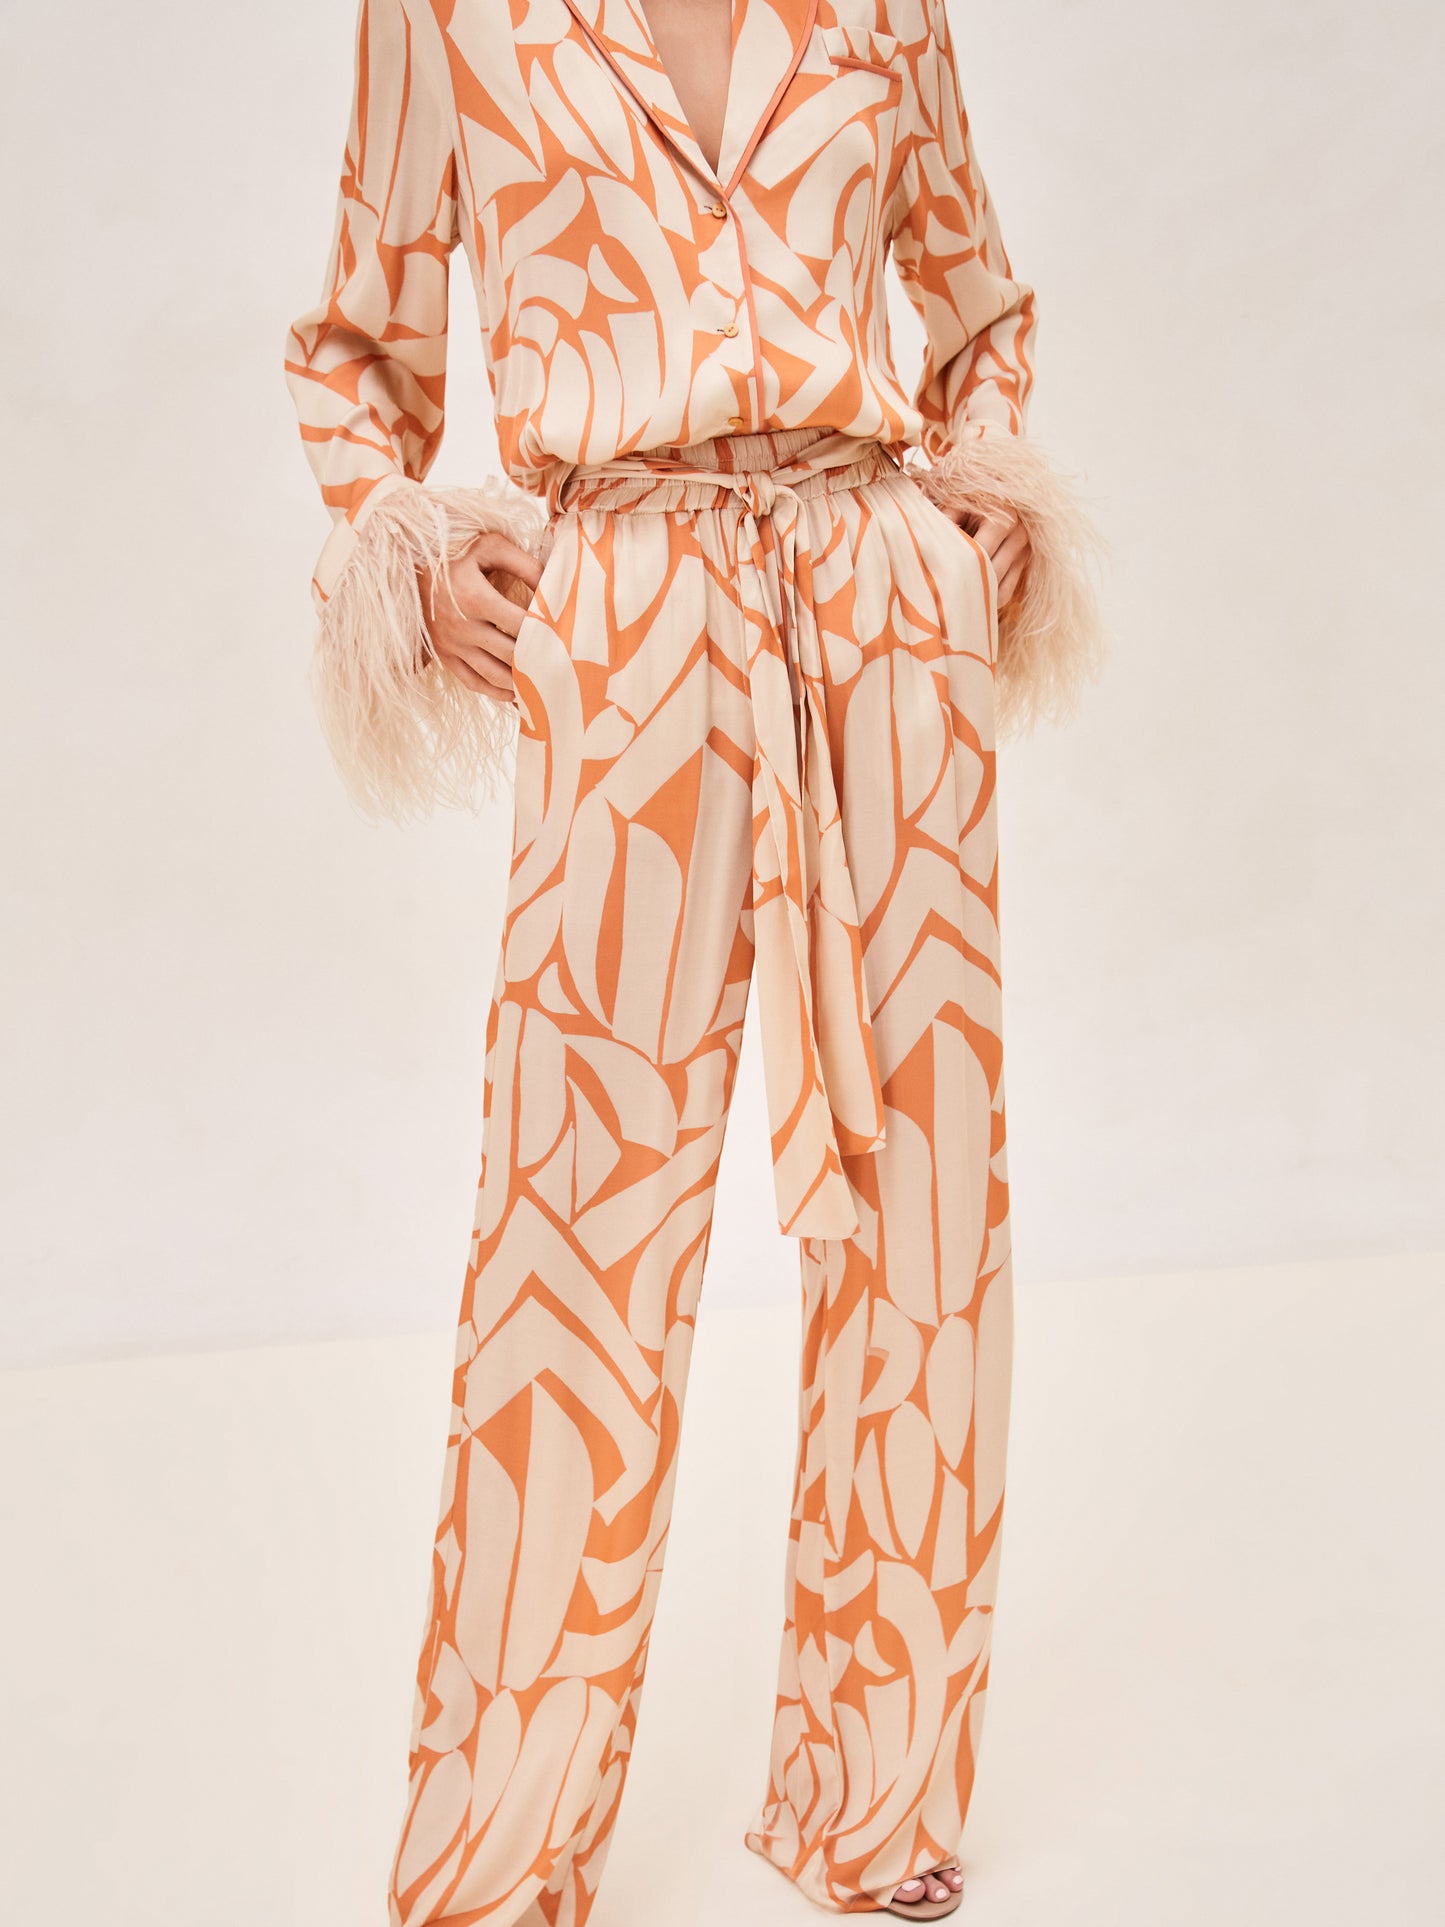 Alexis Cassel Pants in melon mirage hover image